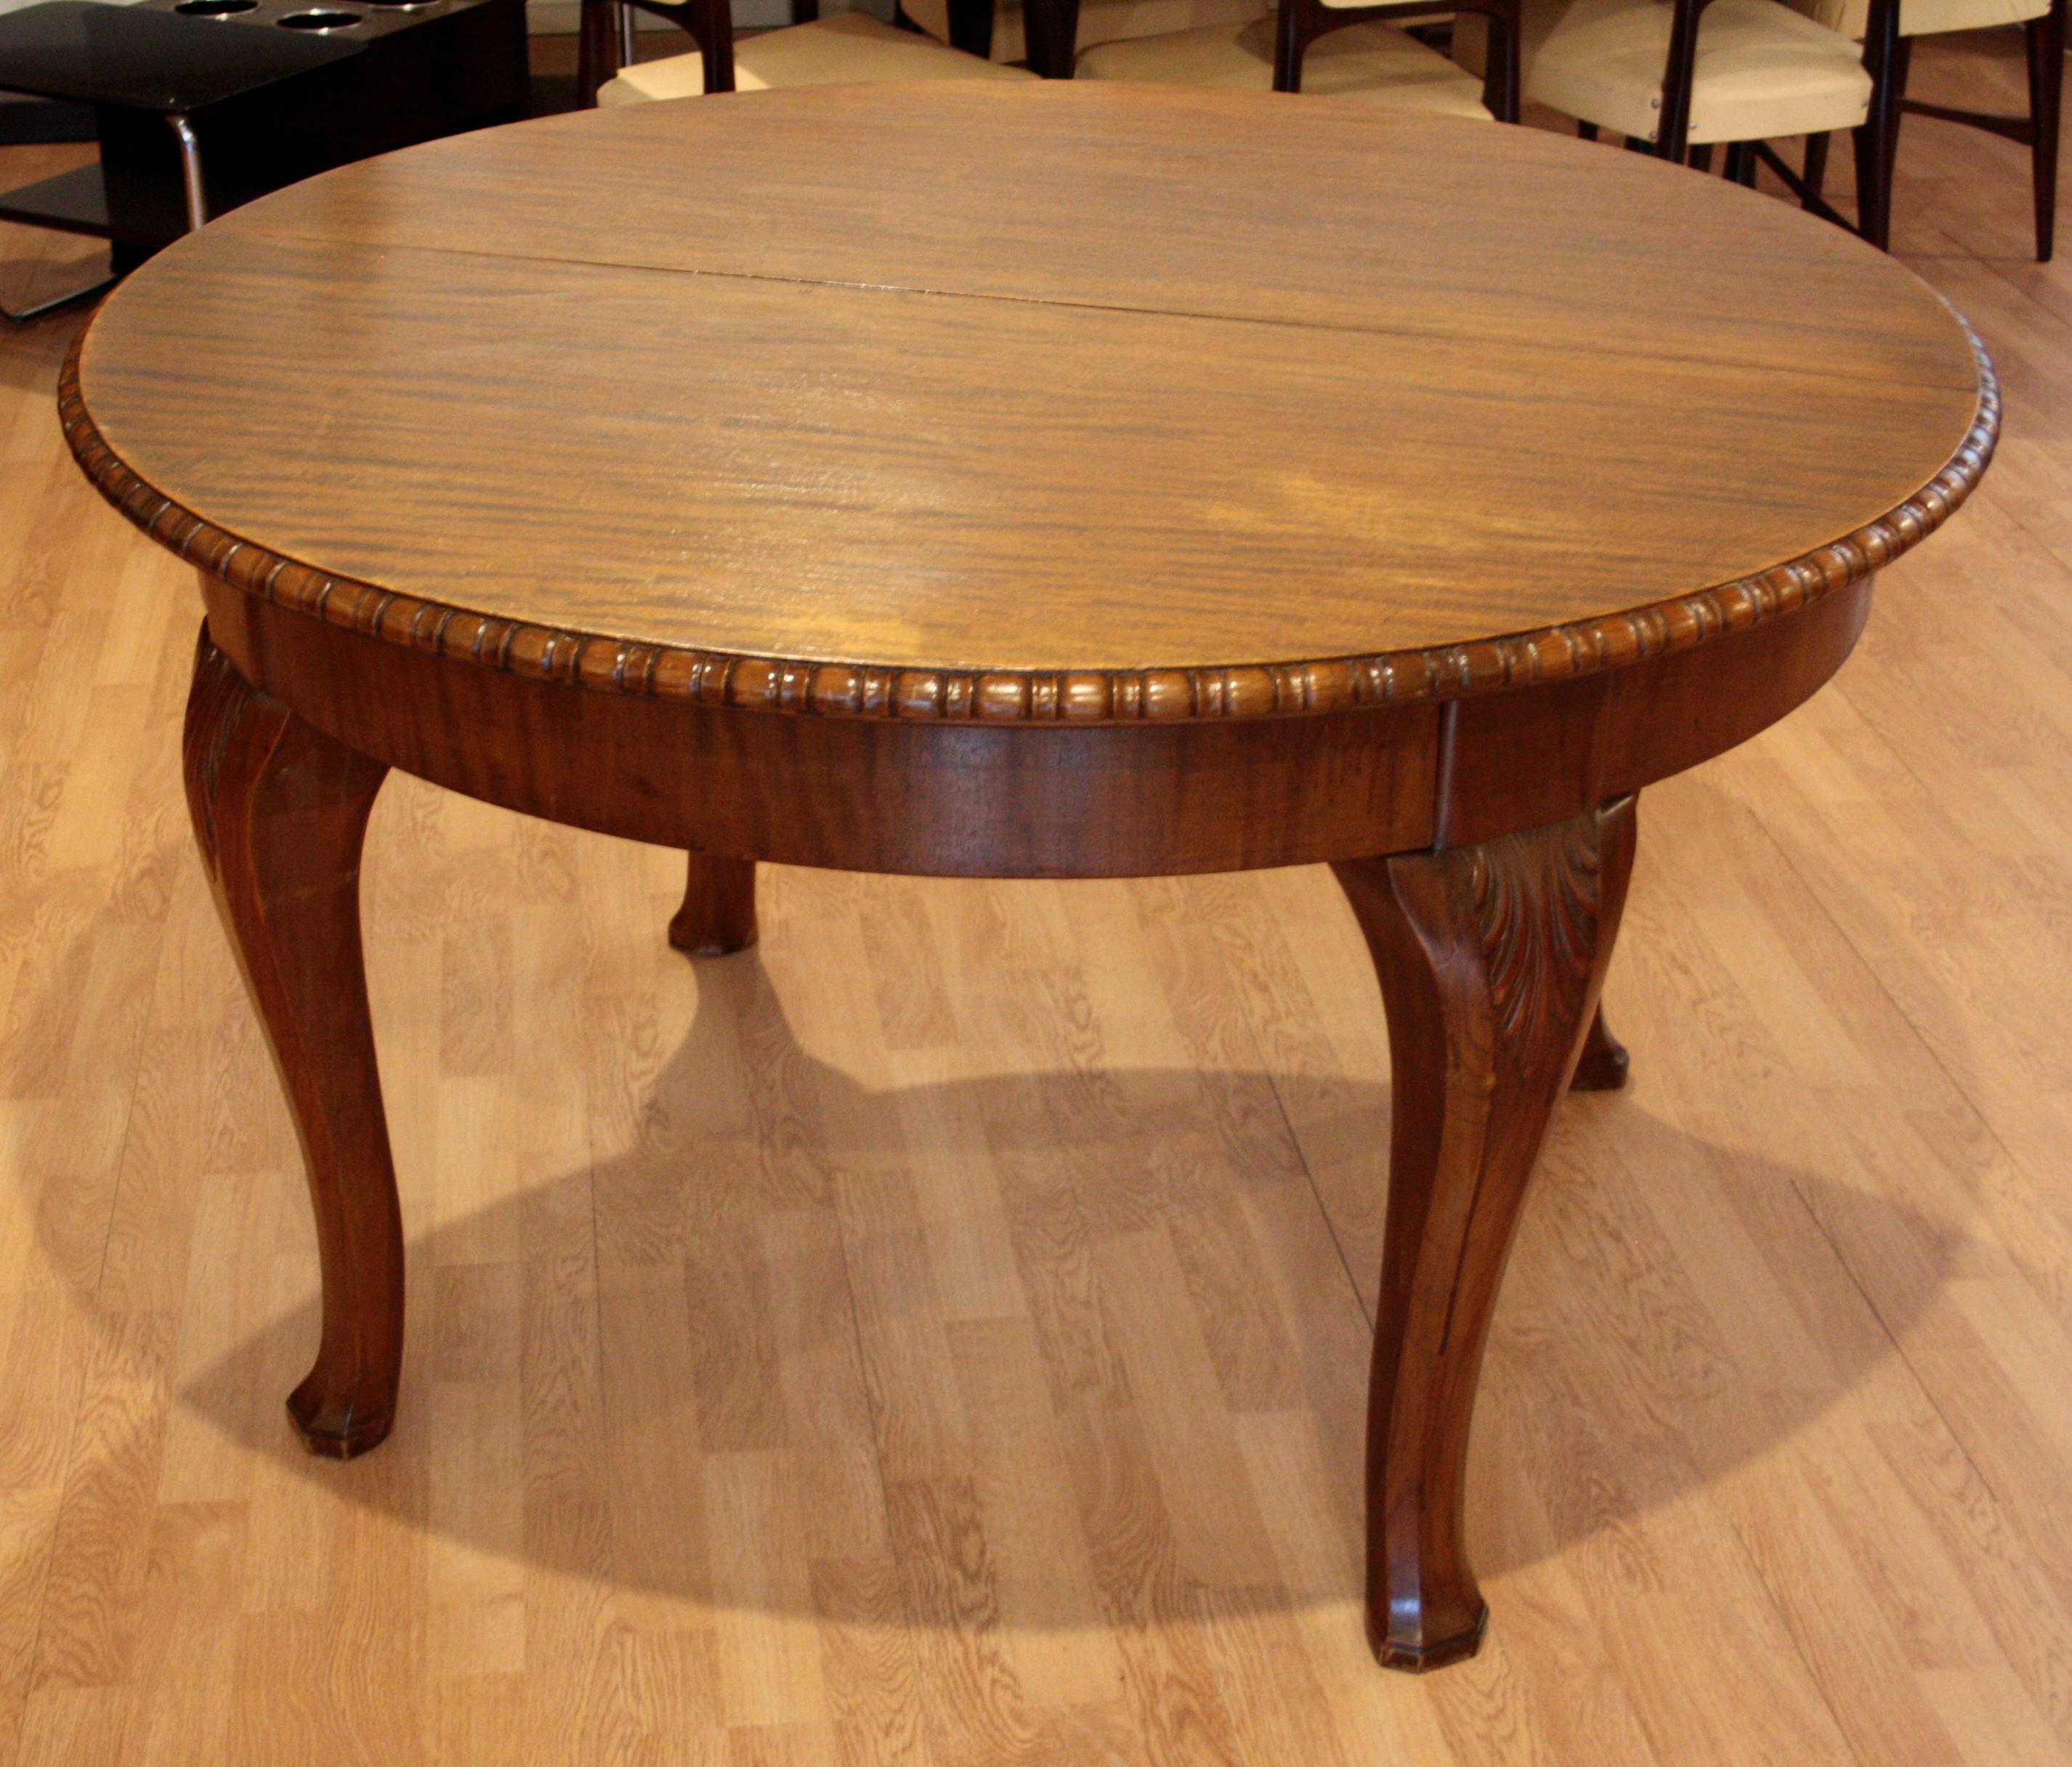 Vintage Oak Extendable Solid Table Classical Italian Quality 160 x 130 cm opened For Sale 8